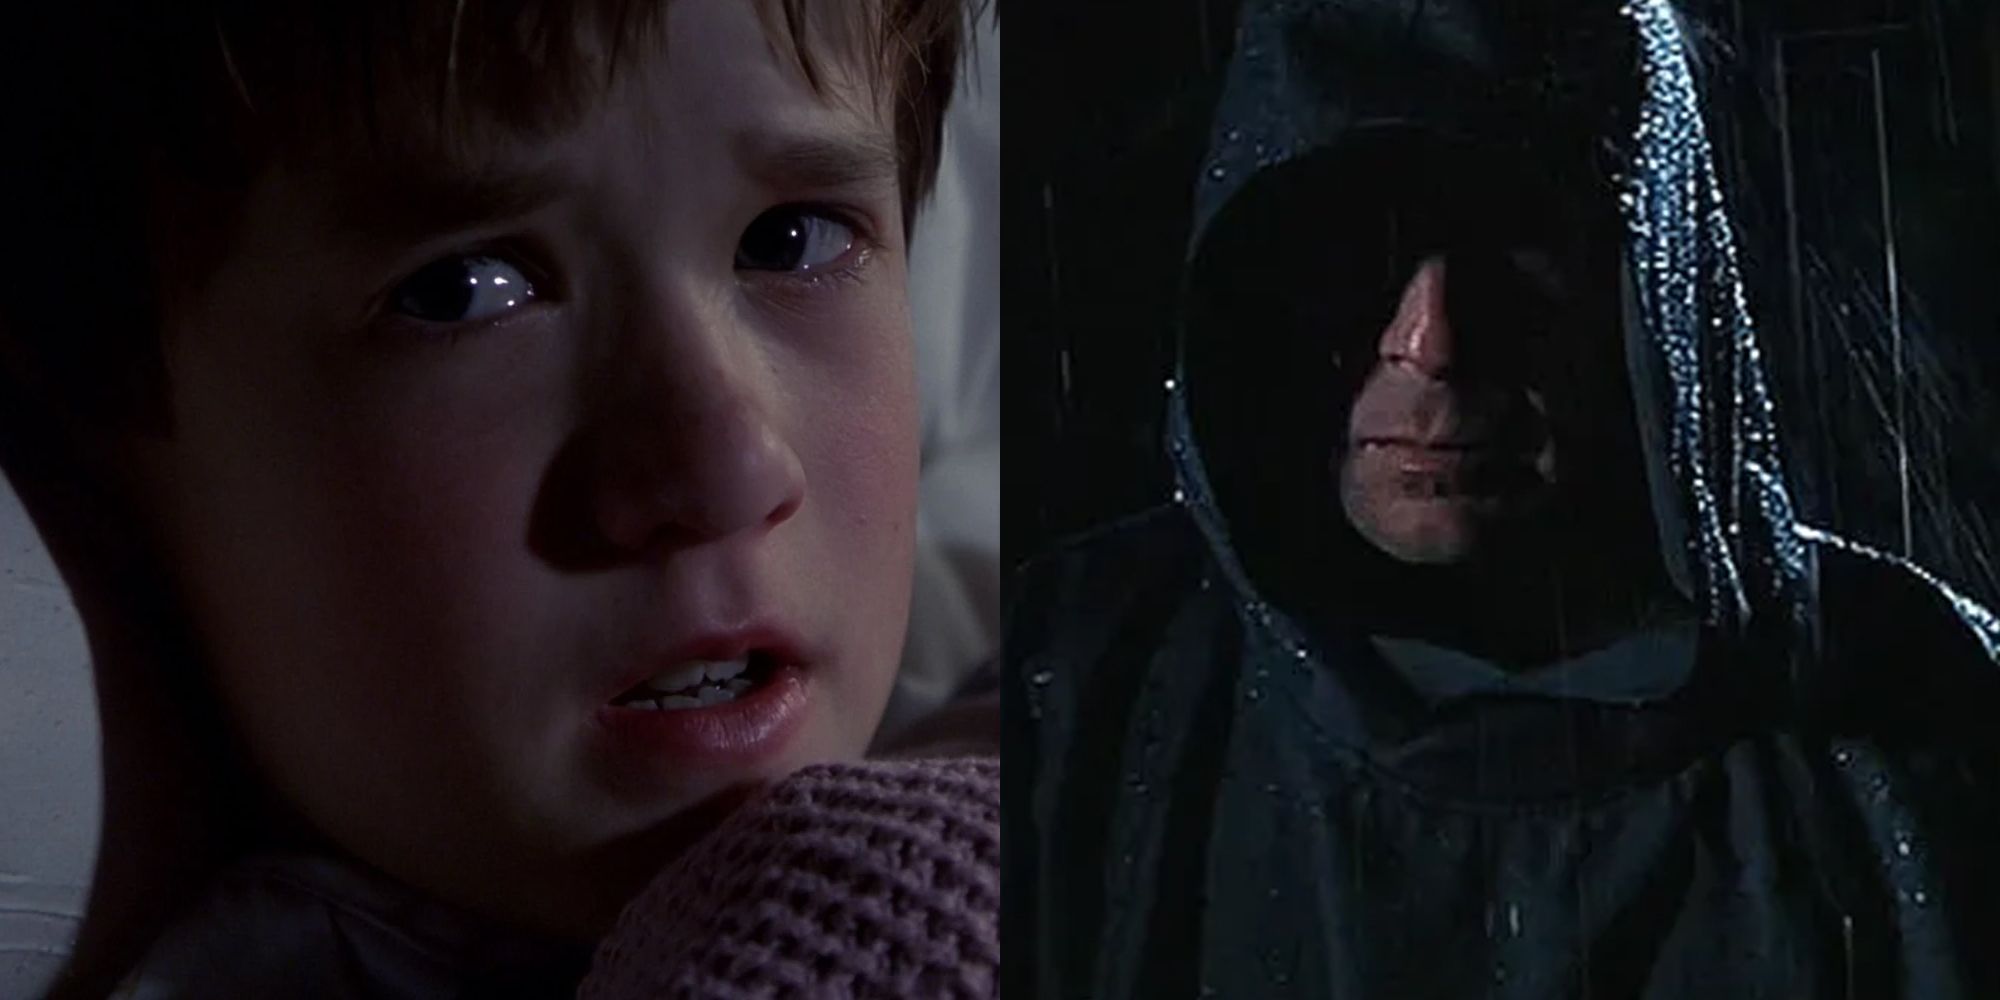 The Sixth Sense and Unbreakable